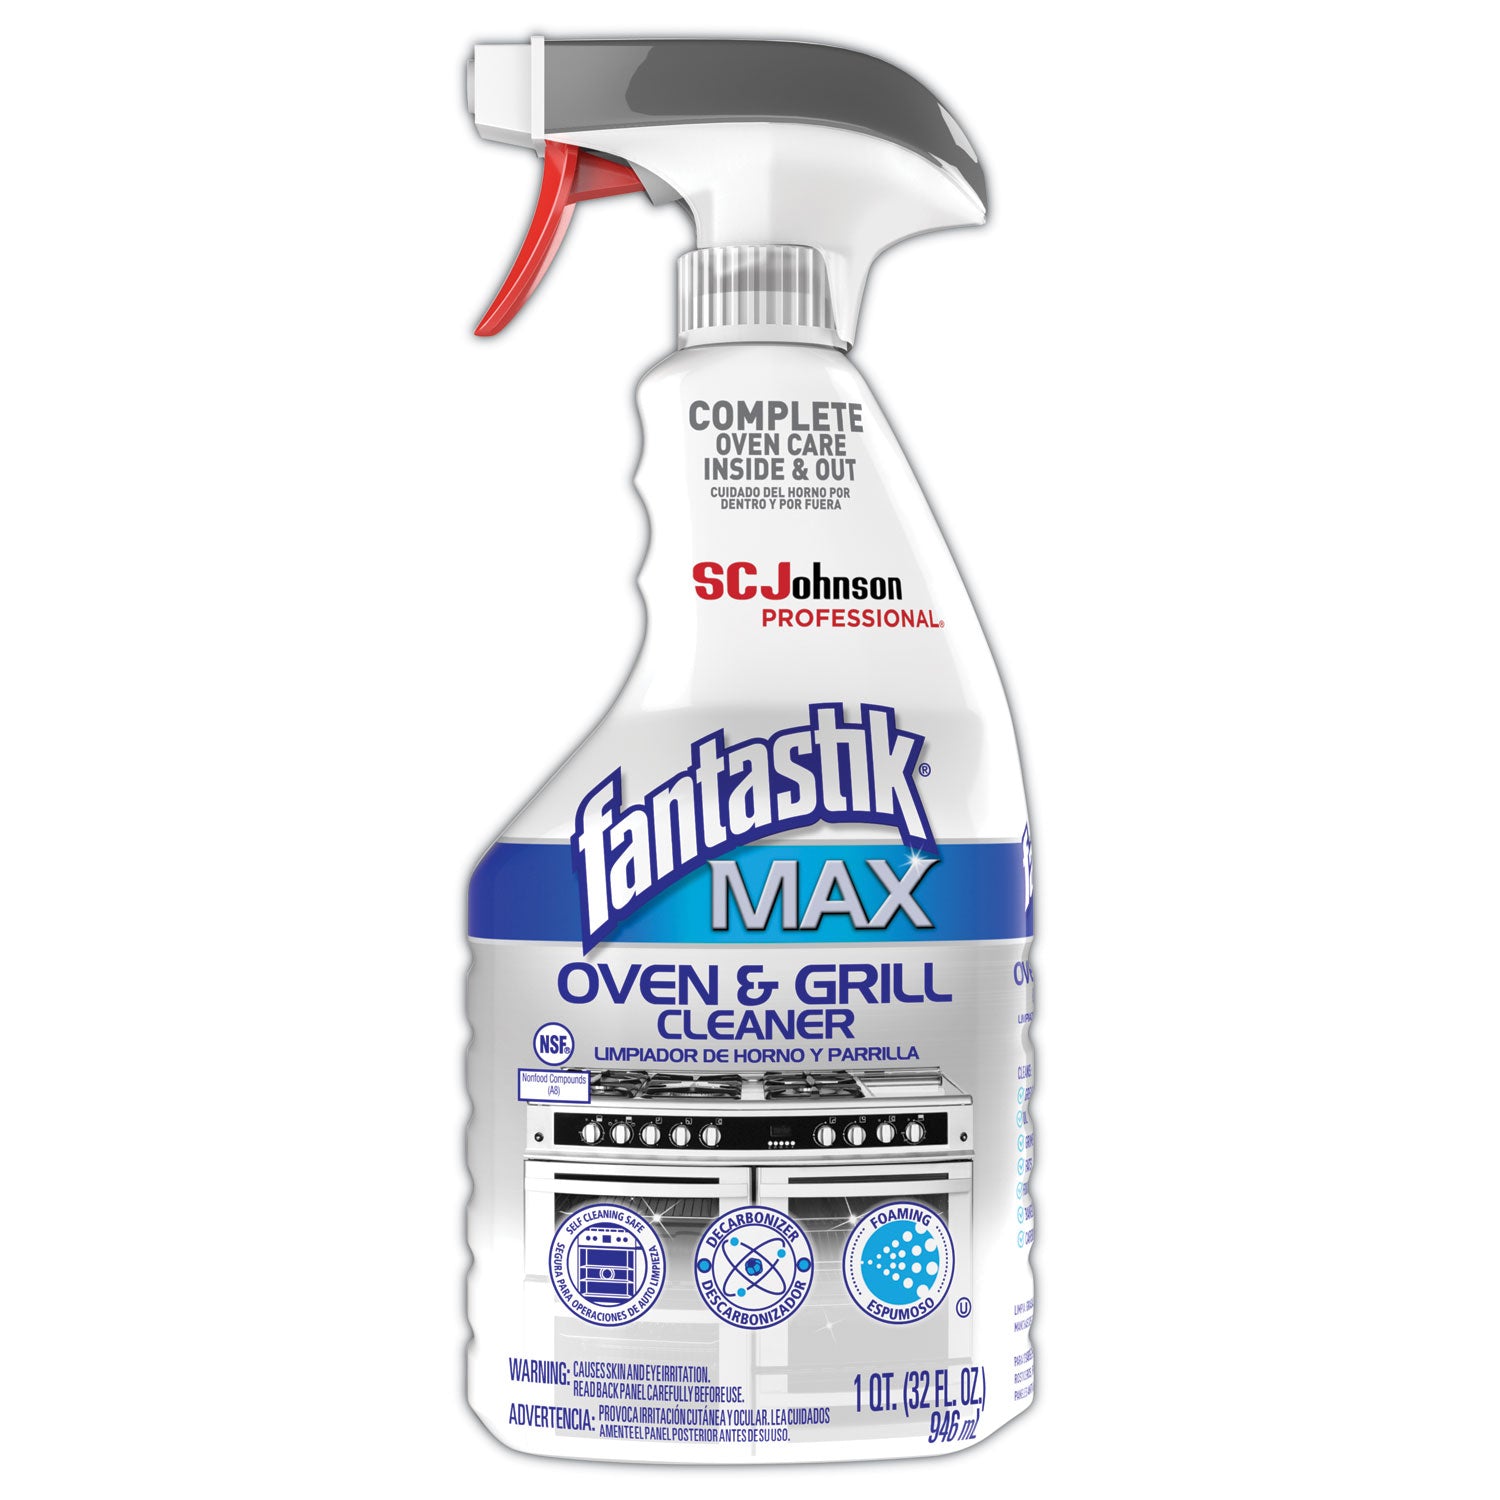 max-oven-and-grill-cleaner-32-oz-bottle_sjn323562 - 1